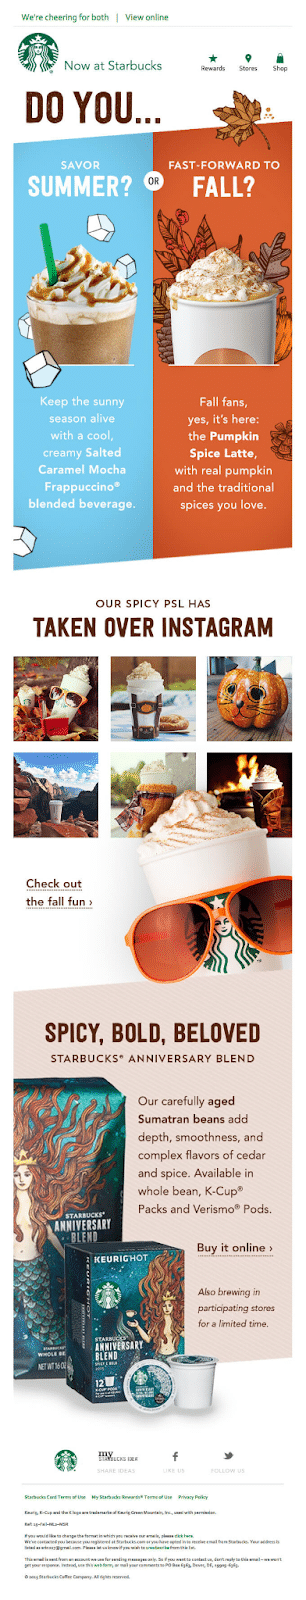 The Starbucks newsletter encourages recipients to vote for their favorite items in the cafe's menu